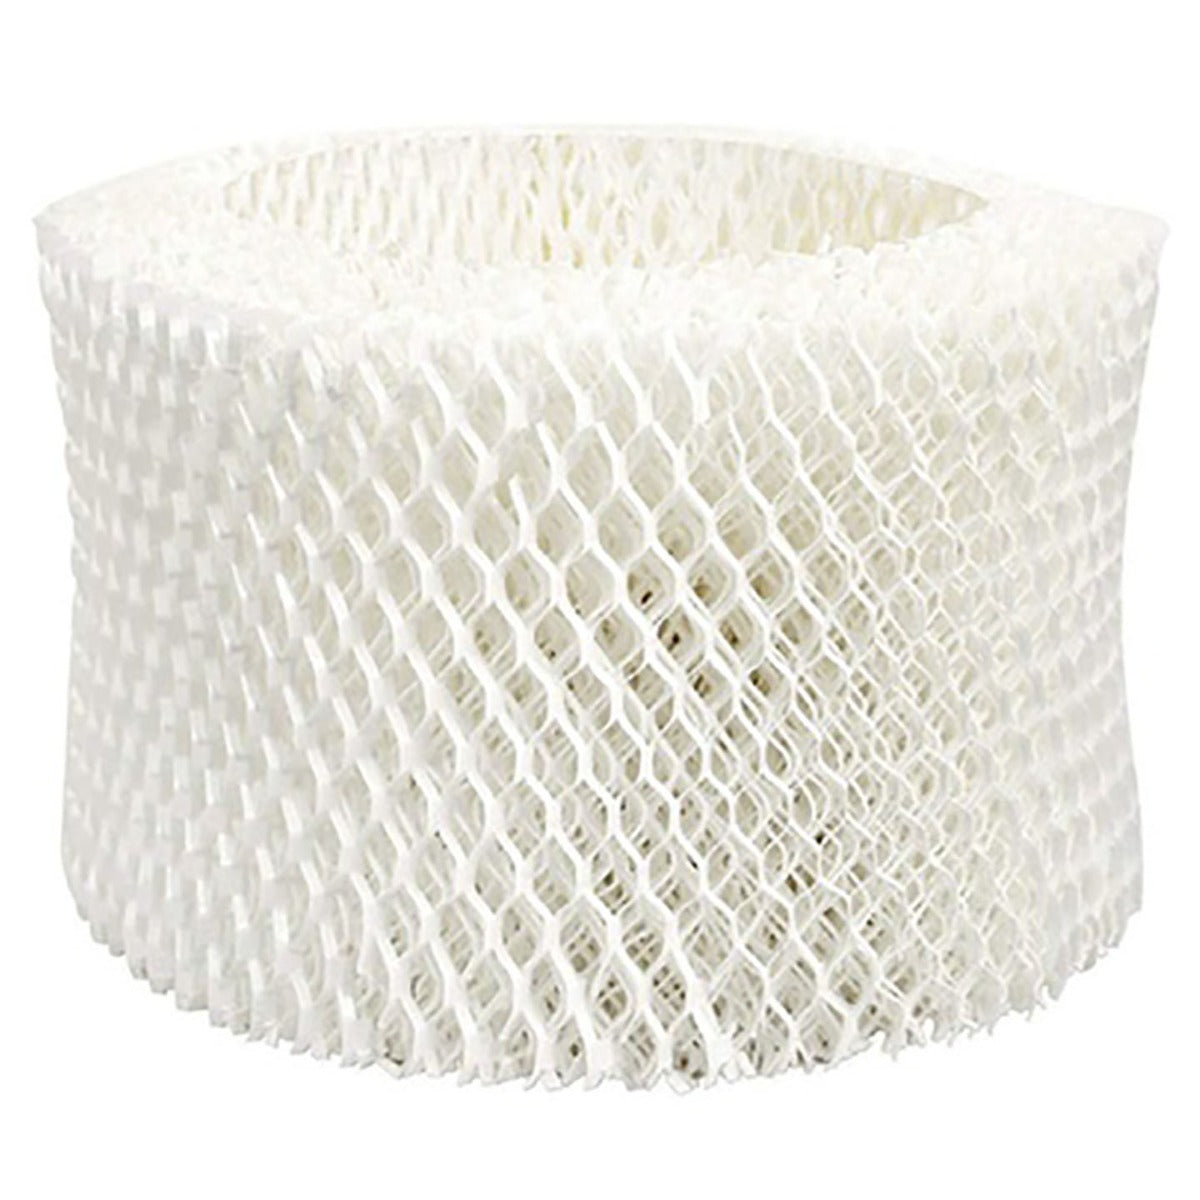 Honeywell HAC-504 Comparable Humidifier Wick Filter by Tier1